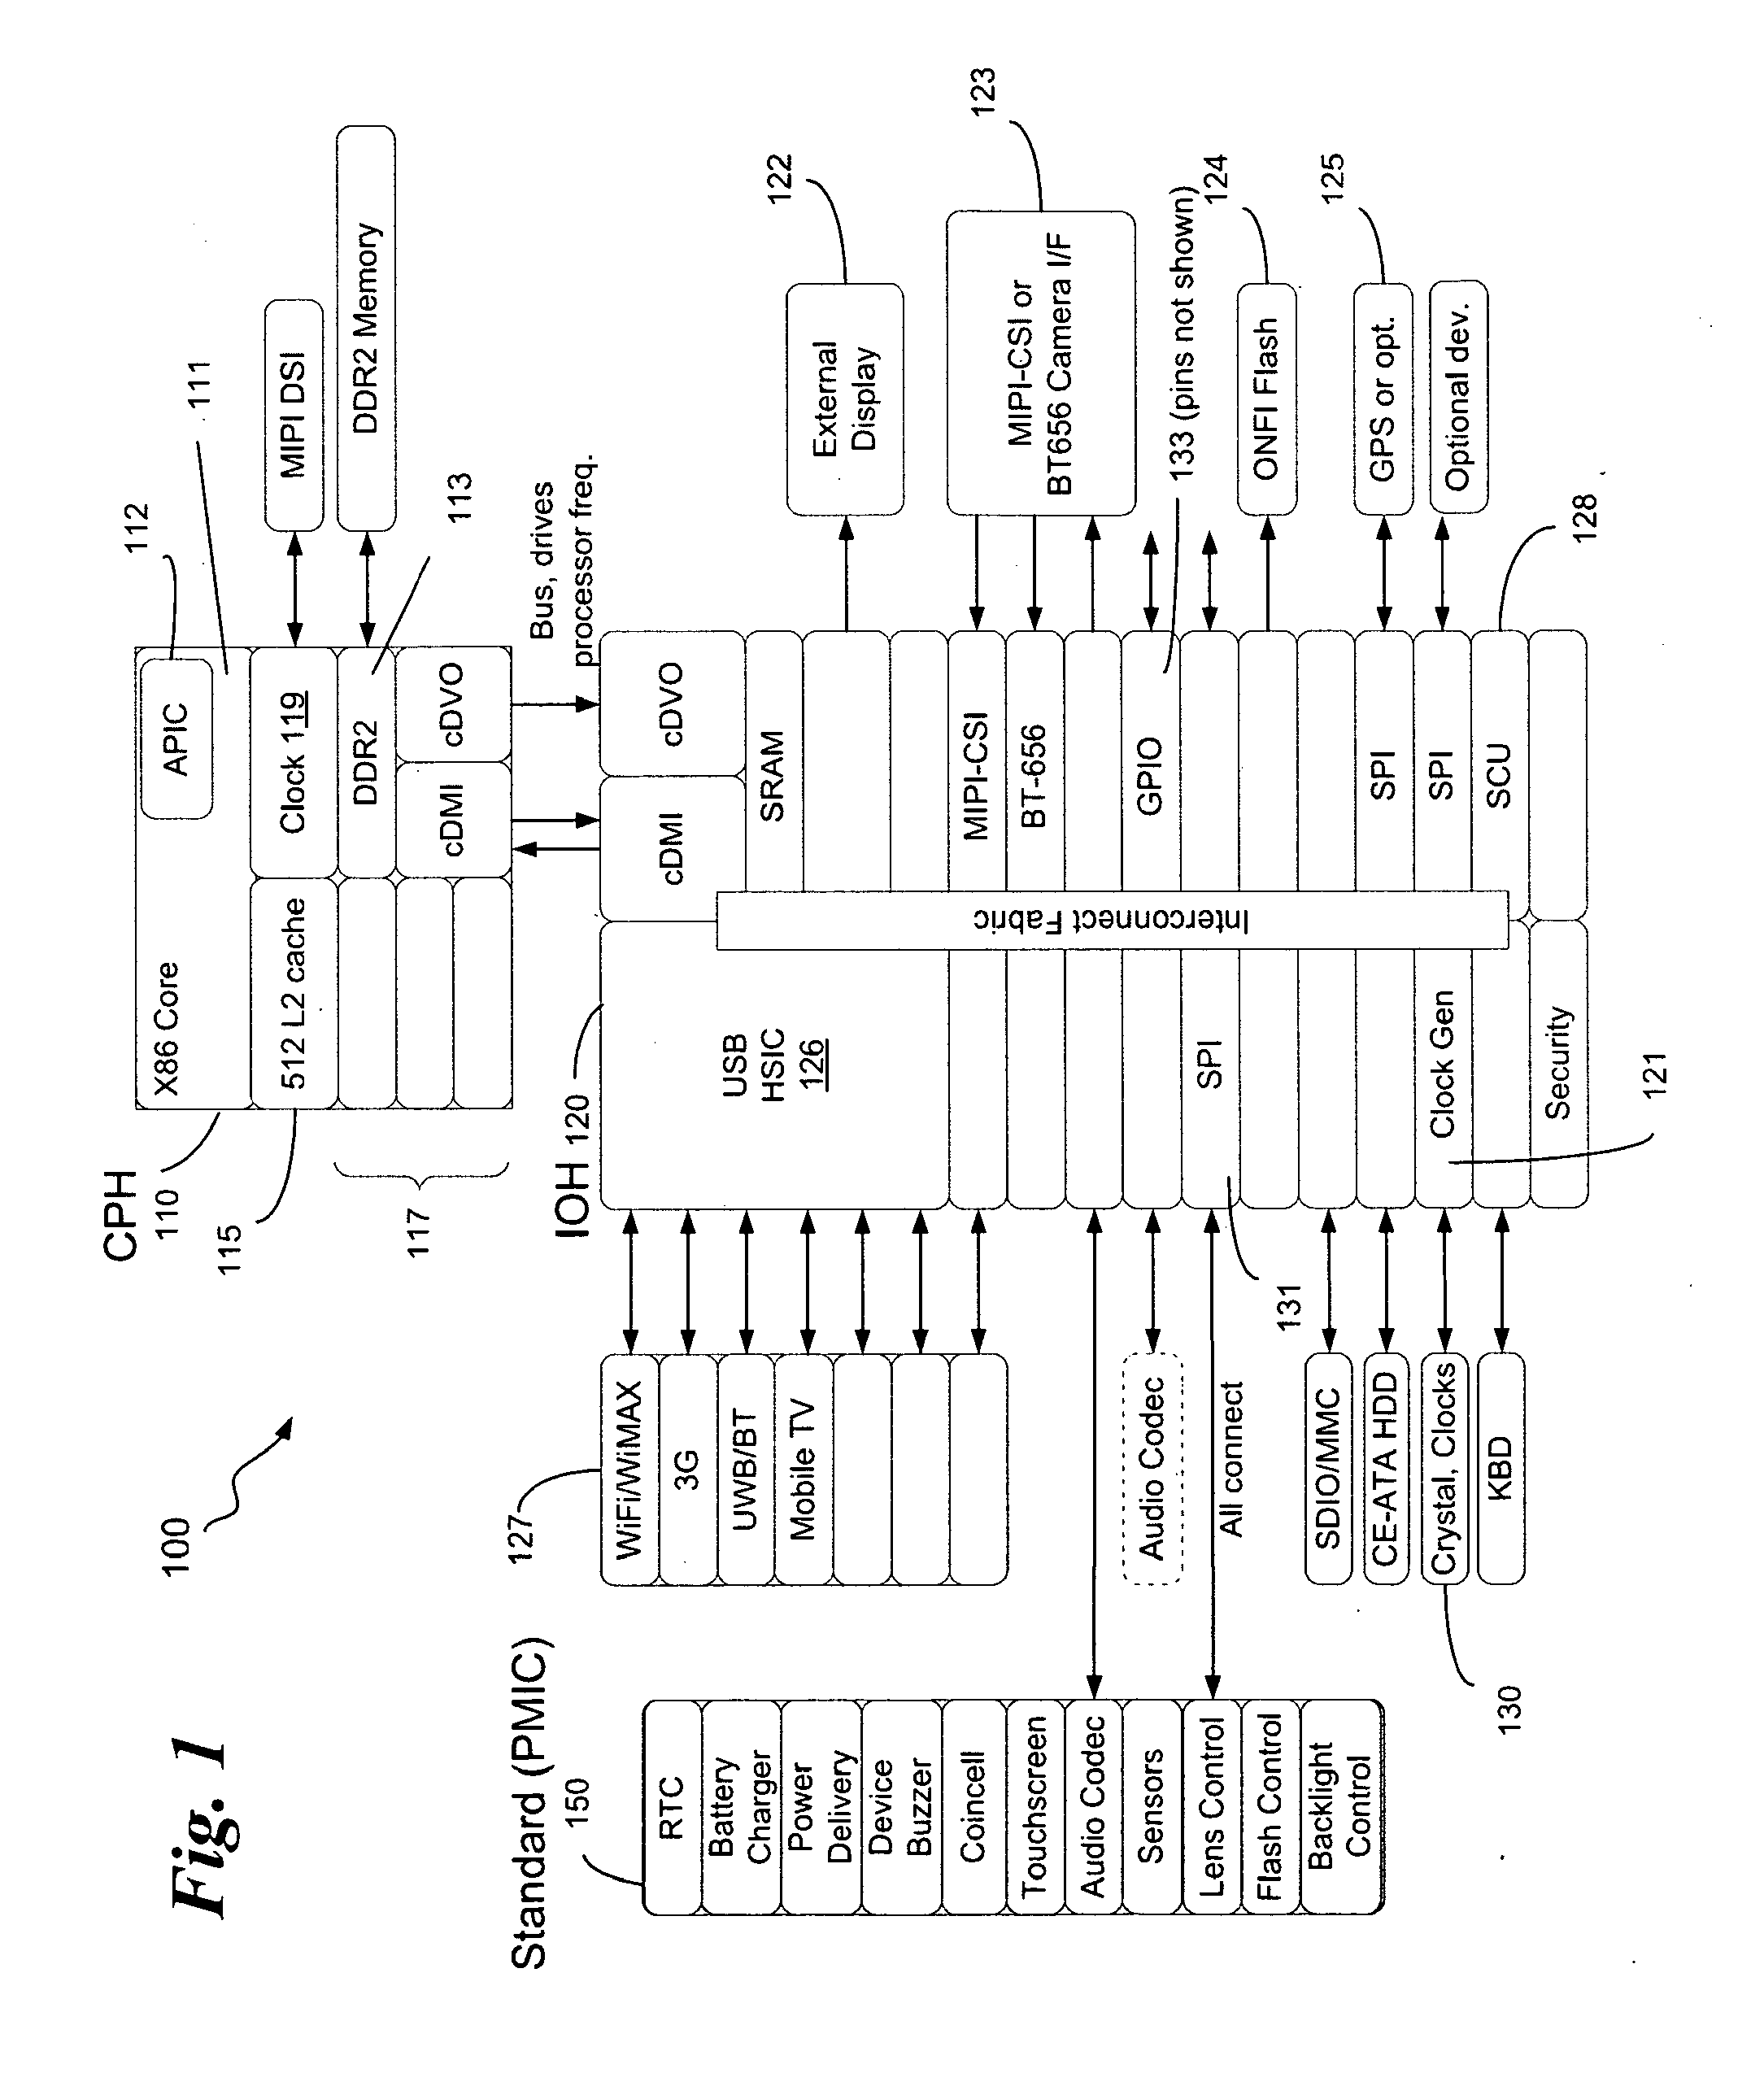 System and method for dynamic, local retriggered interrupt routing discovery